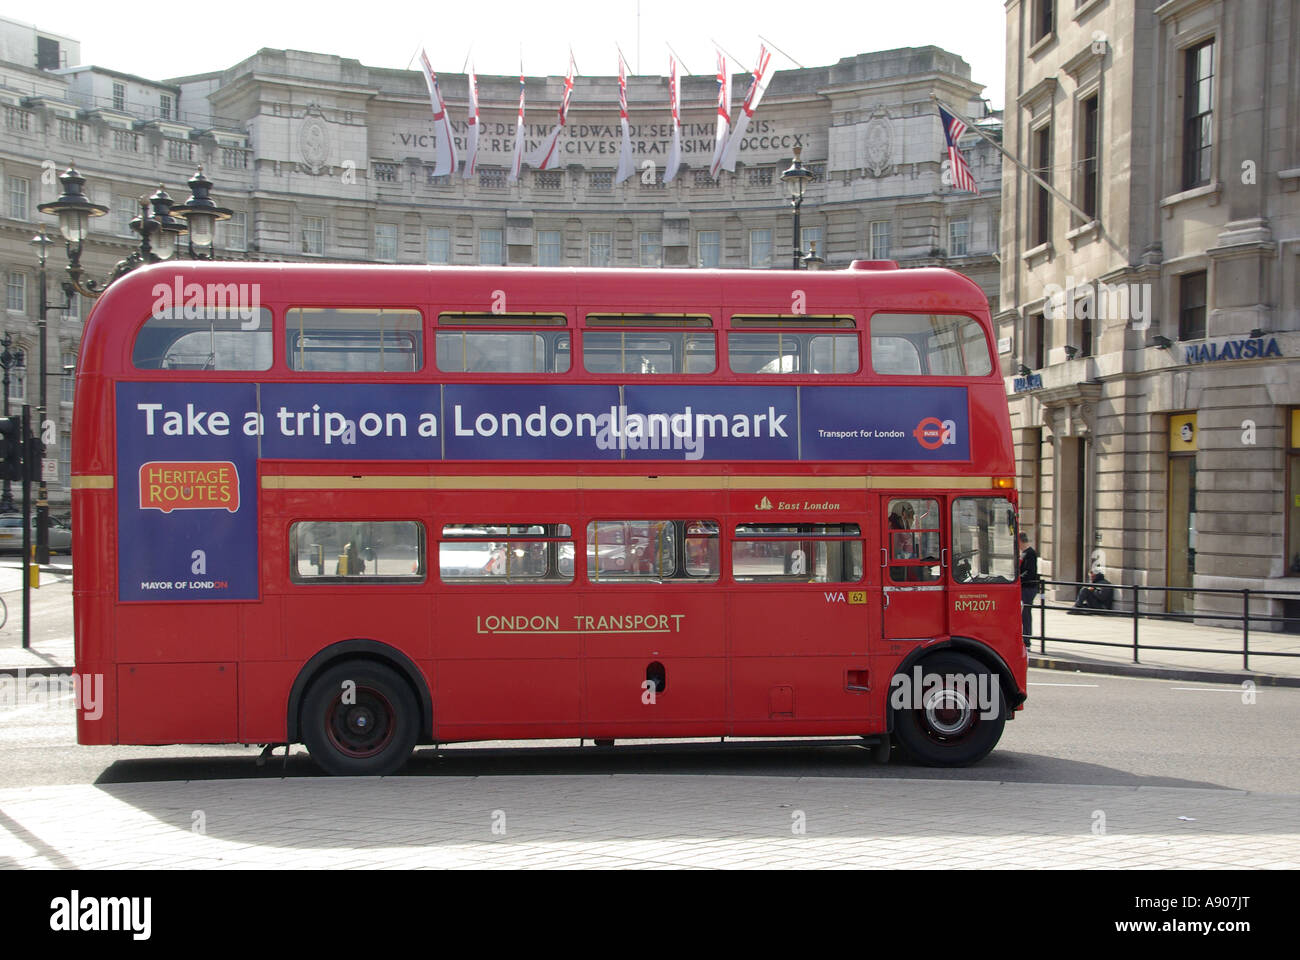 Red Routemaster double decker bus route 15 advert promoting Heritage Route and trip on a moving London Landmark seen at Admiralty Arch England UK Stock Photo